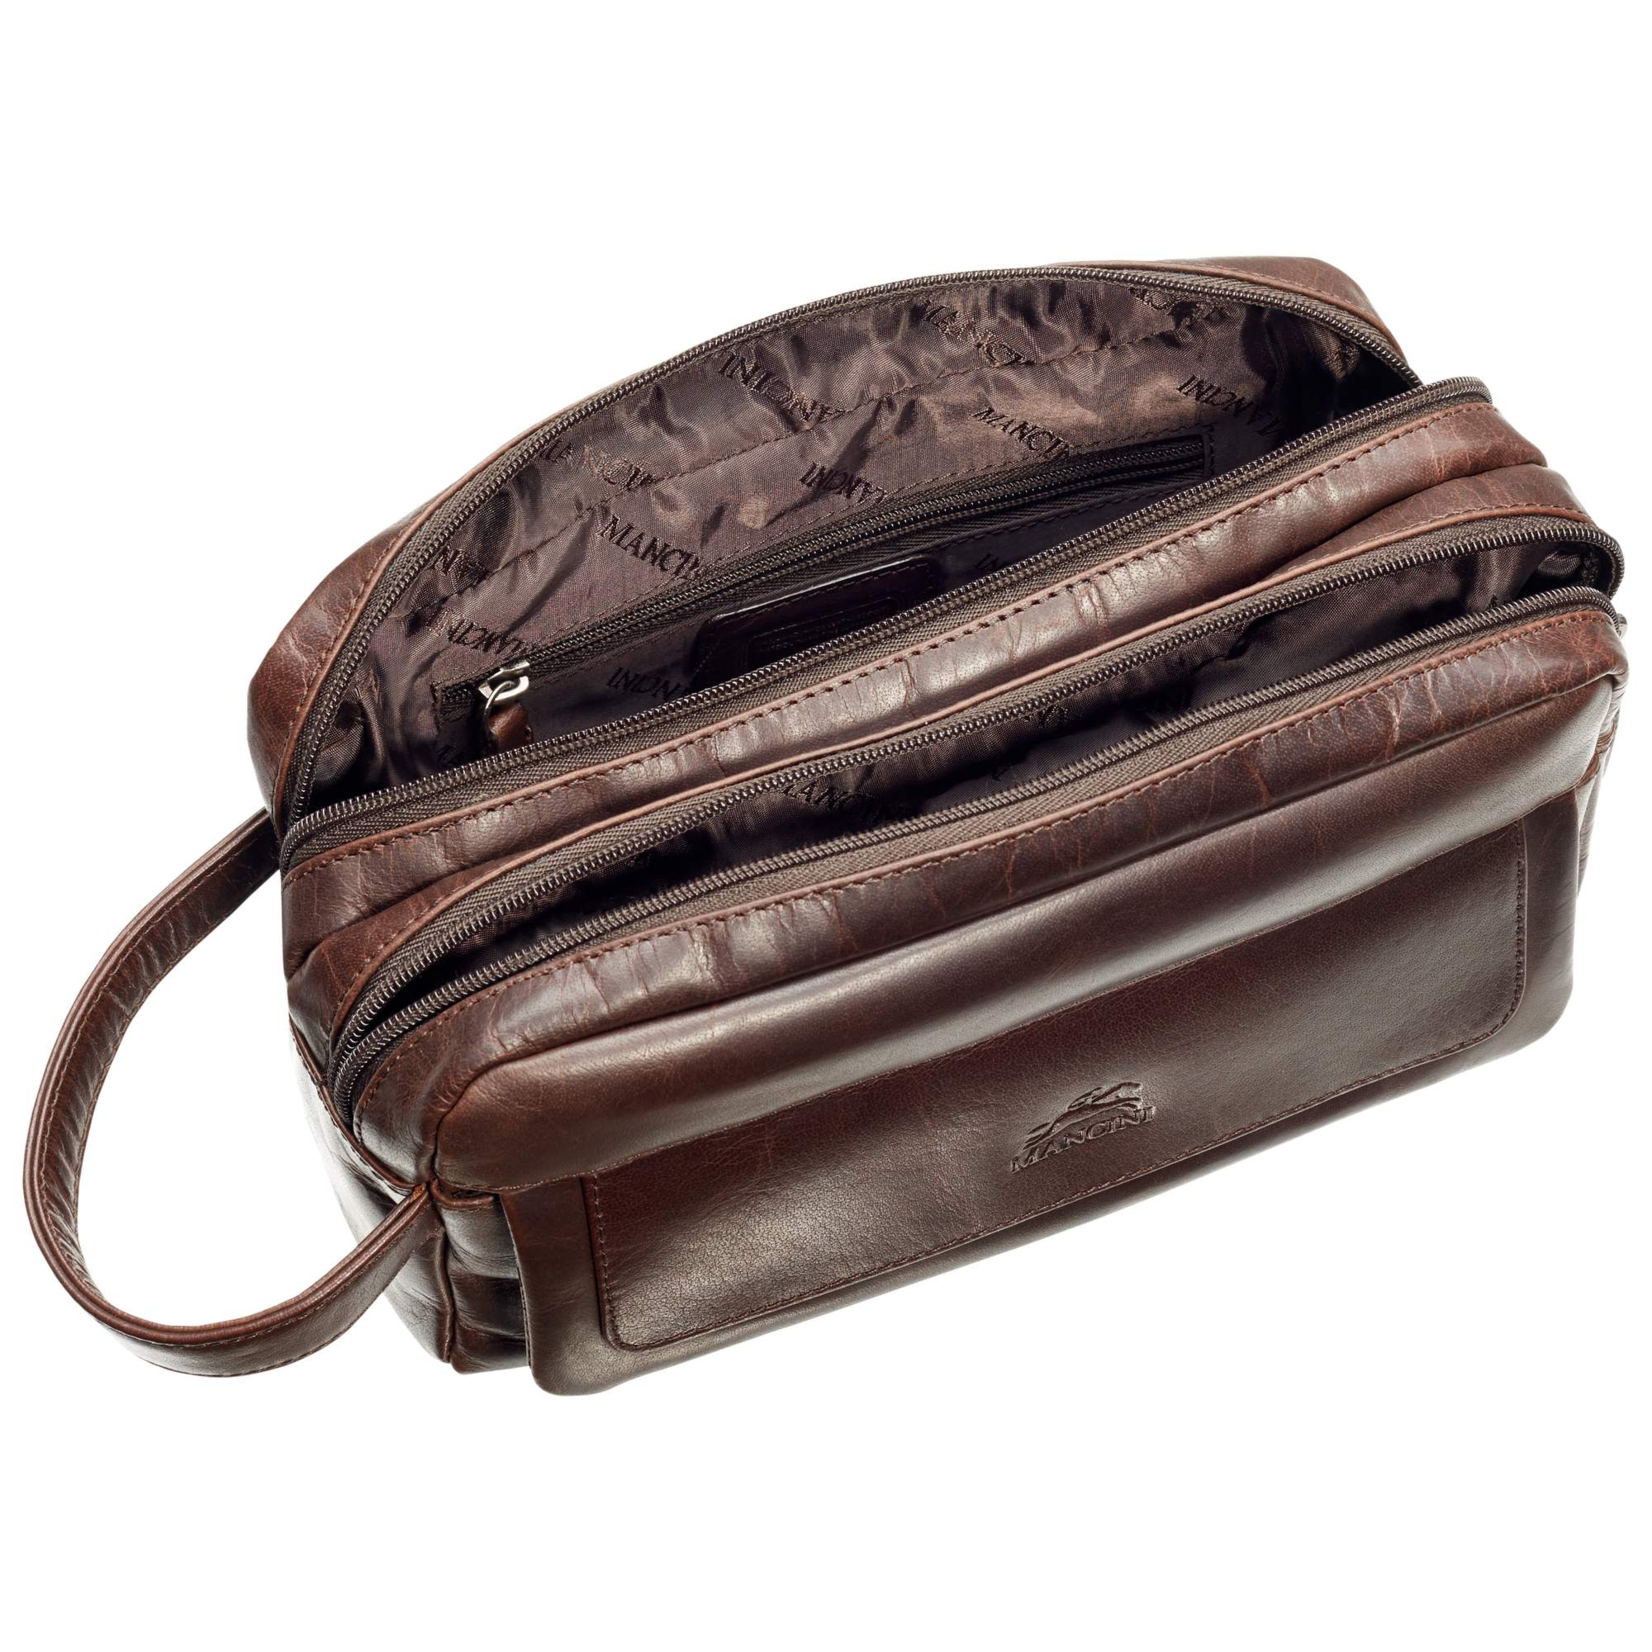 Mancini Double Compartment Buffalo Leather Top Zipper Toiletry Kit